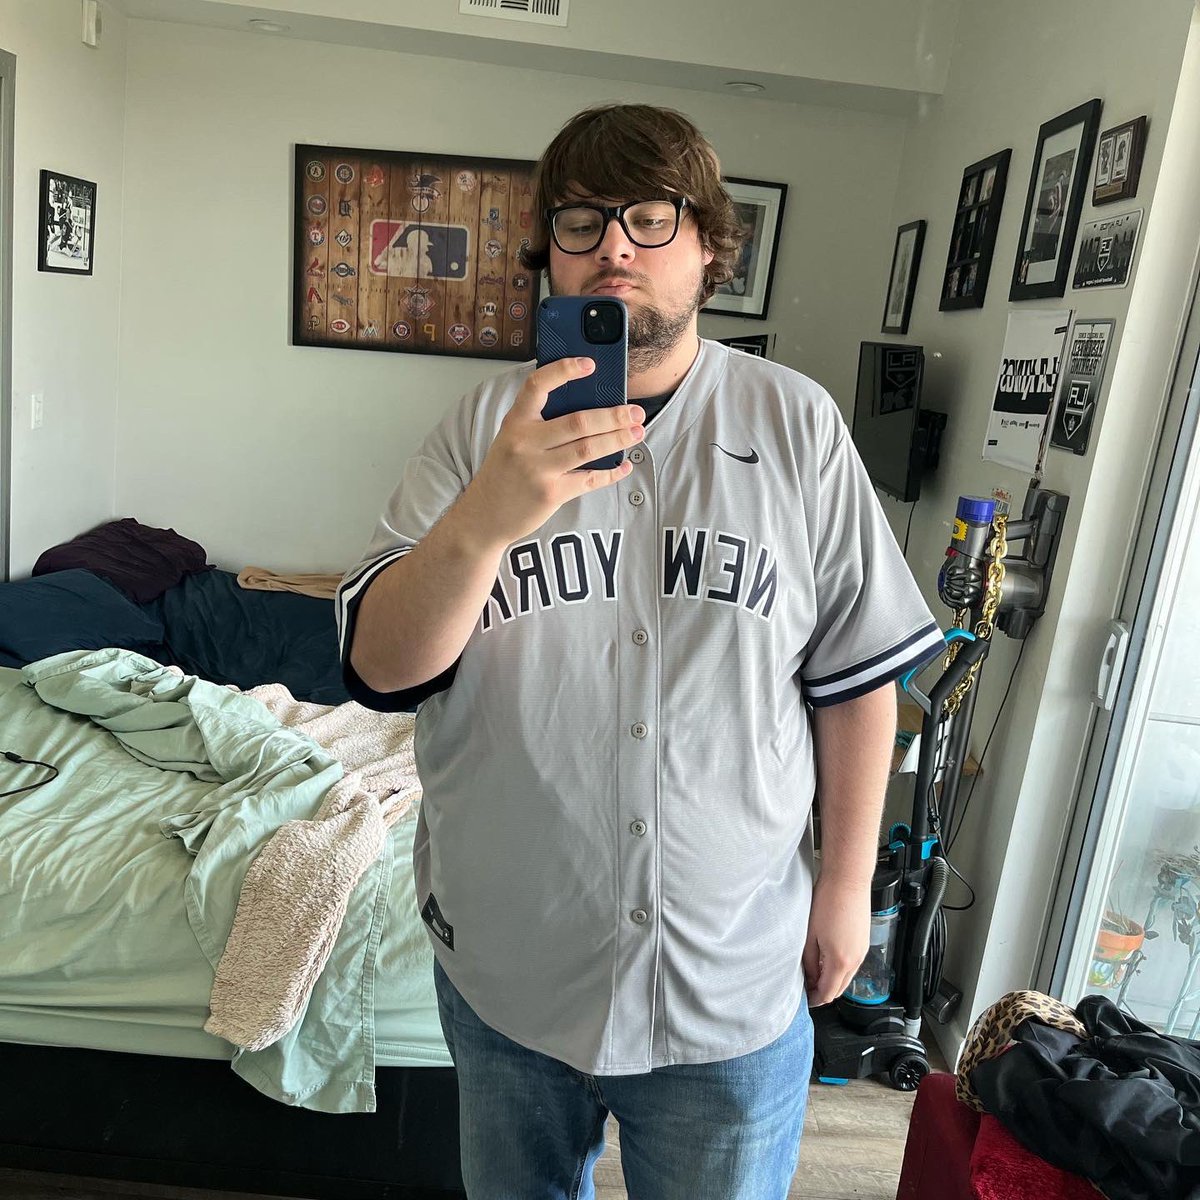 Got a Gerrit Cole jersey (Spider Tack was not included) https://t.co/nj4NC0Ymc9